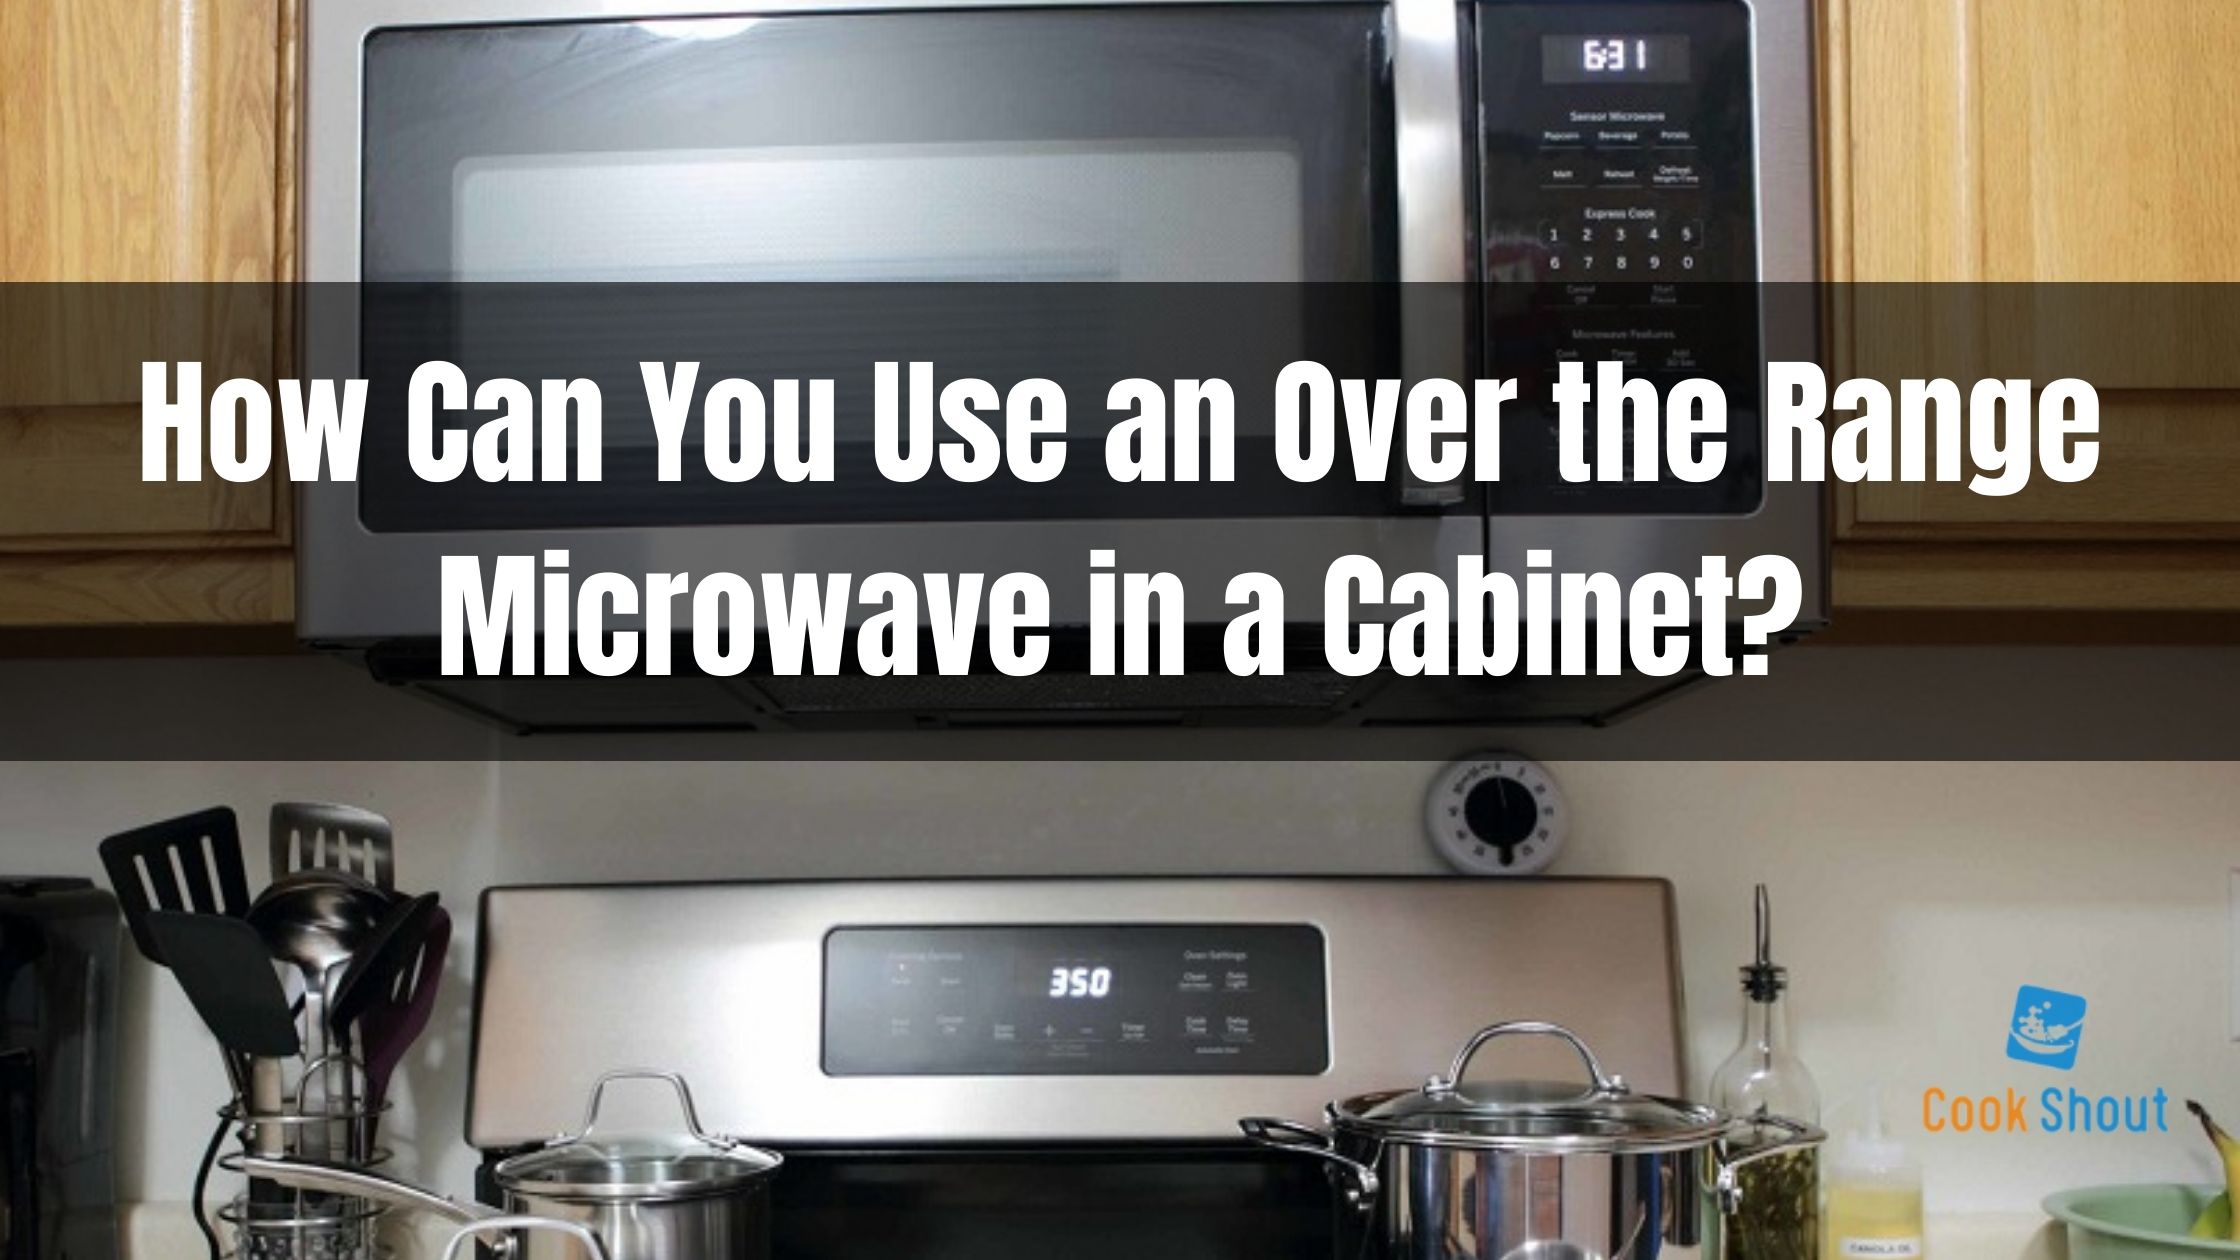 How Can You Use an Over the Range Microwave in a Cabinet?